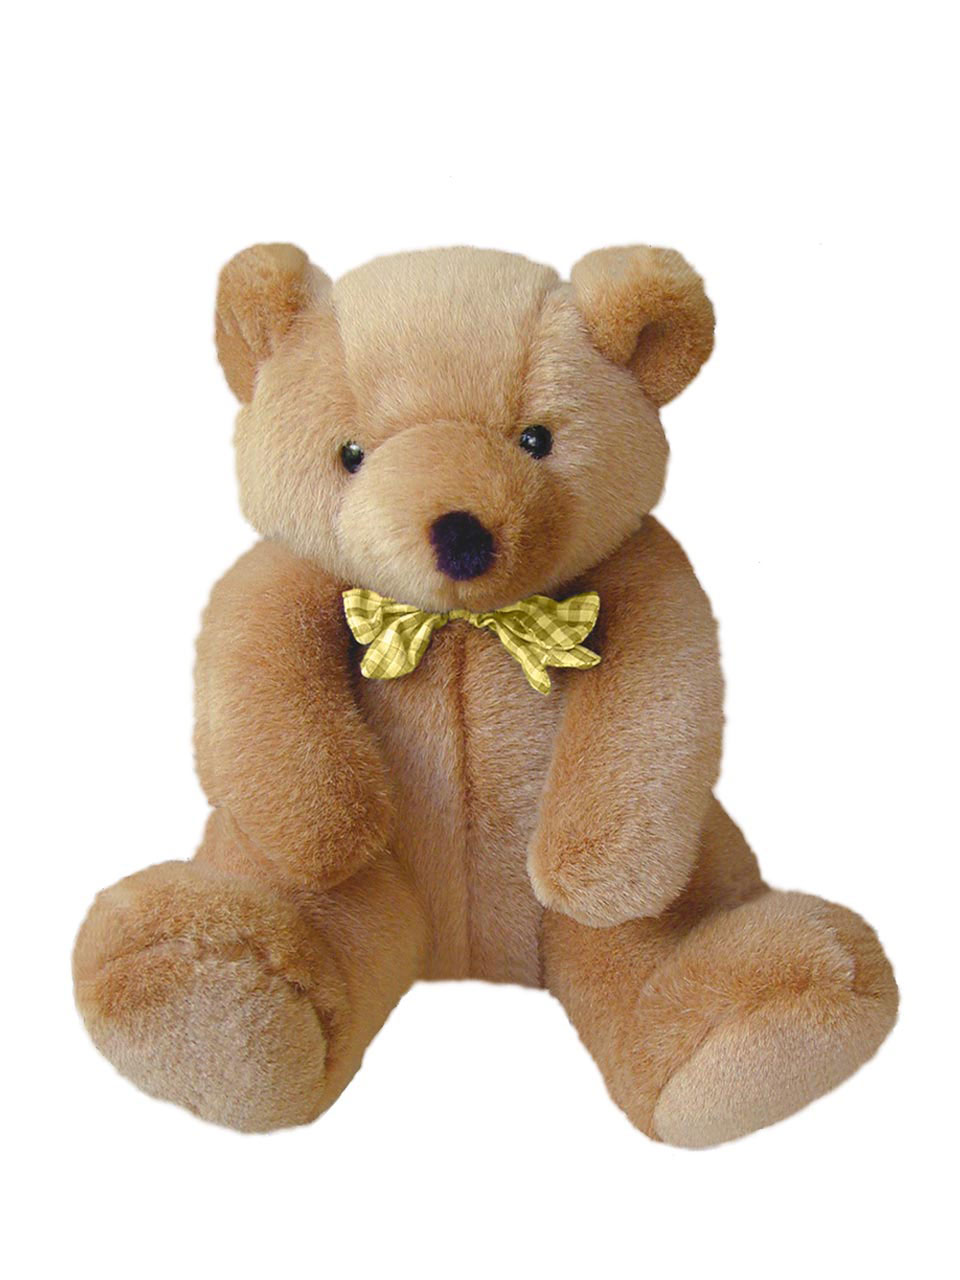 Teddy bear with yellow check bow